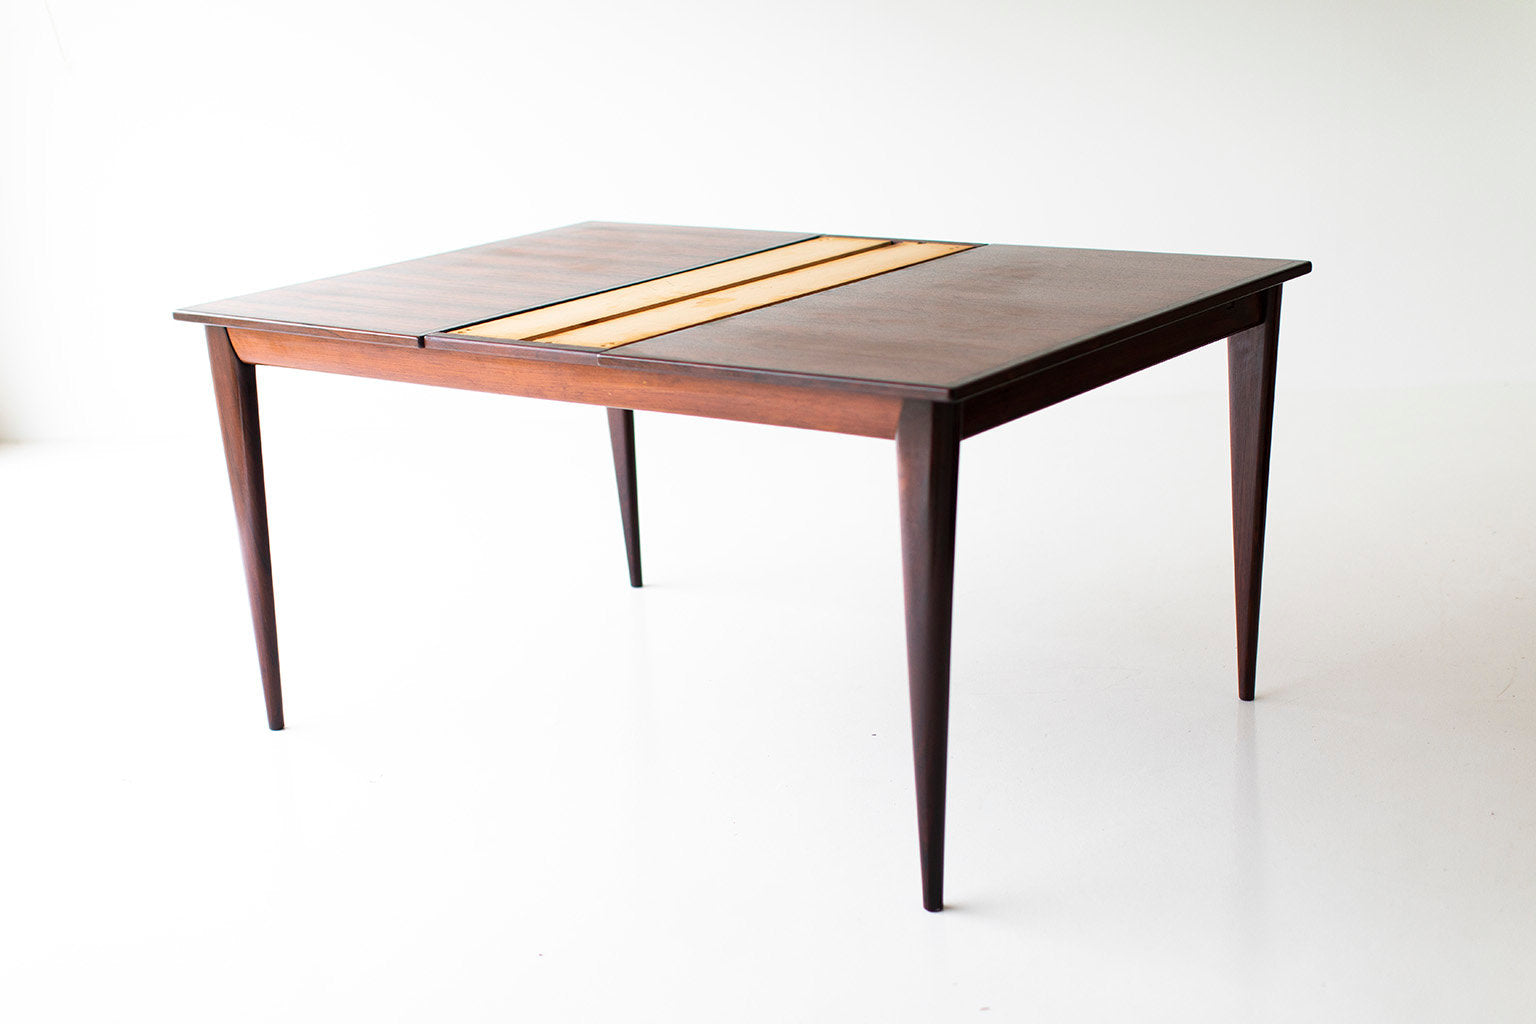 niels-o-moller-rosewood-dining-table-04